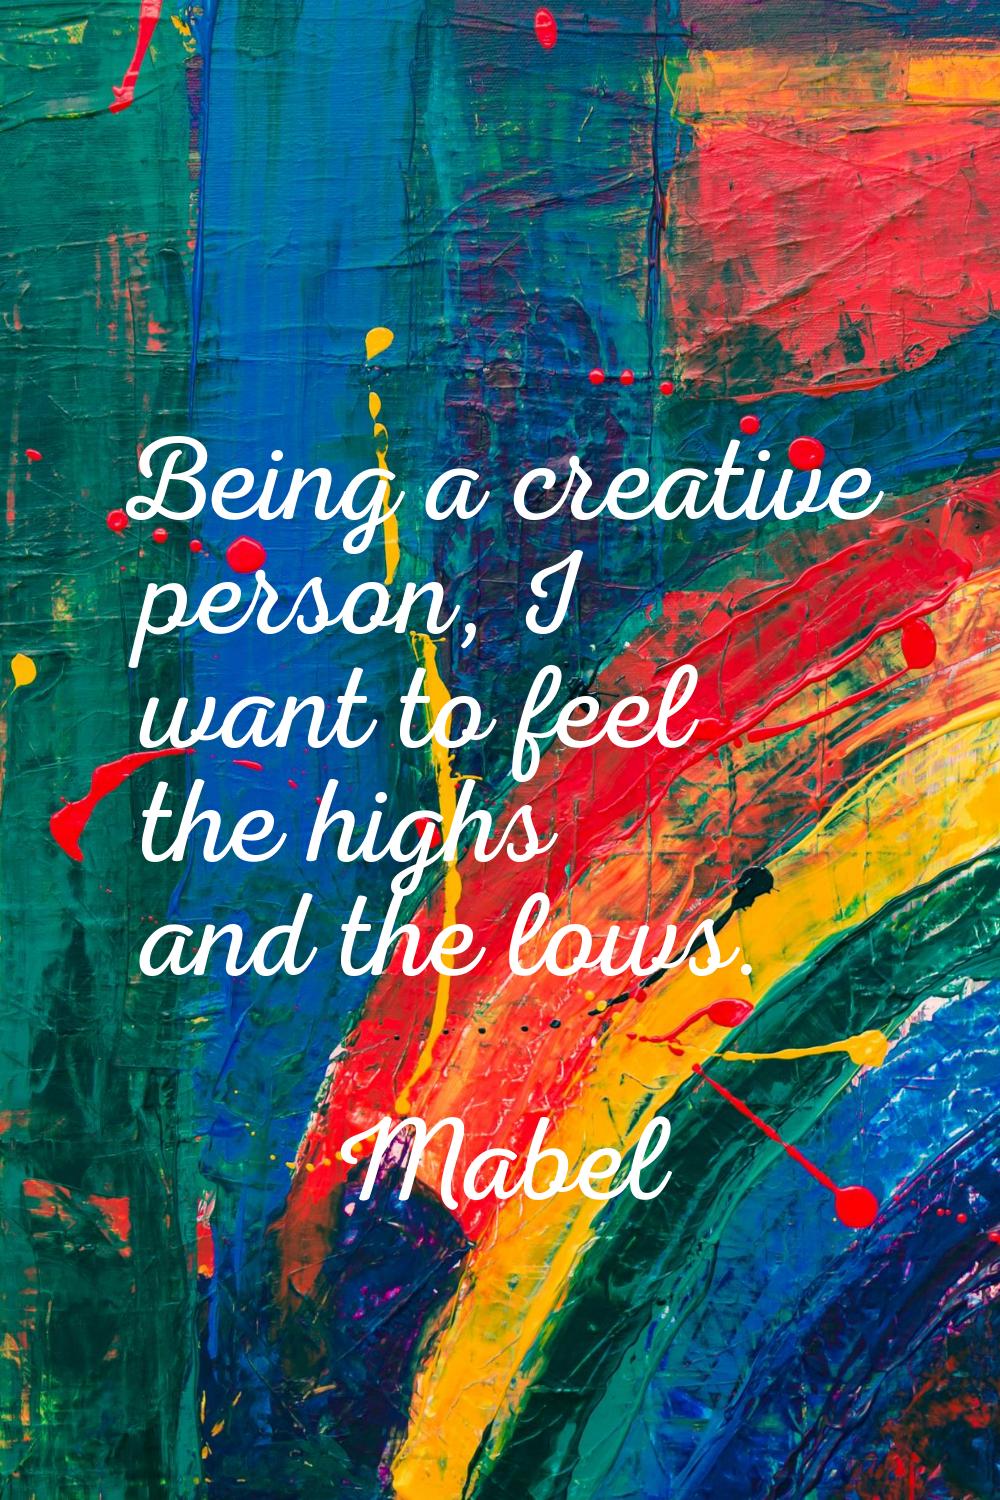 Being a creative person, I want to feel the highs and the lows.